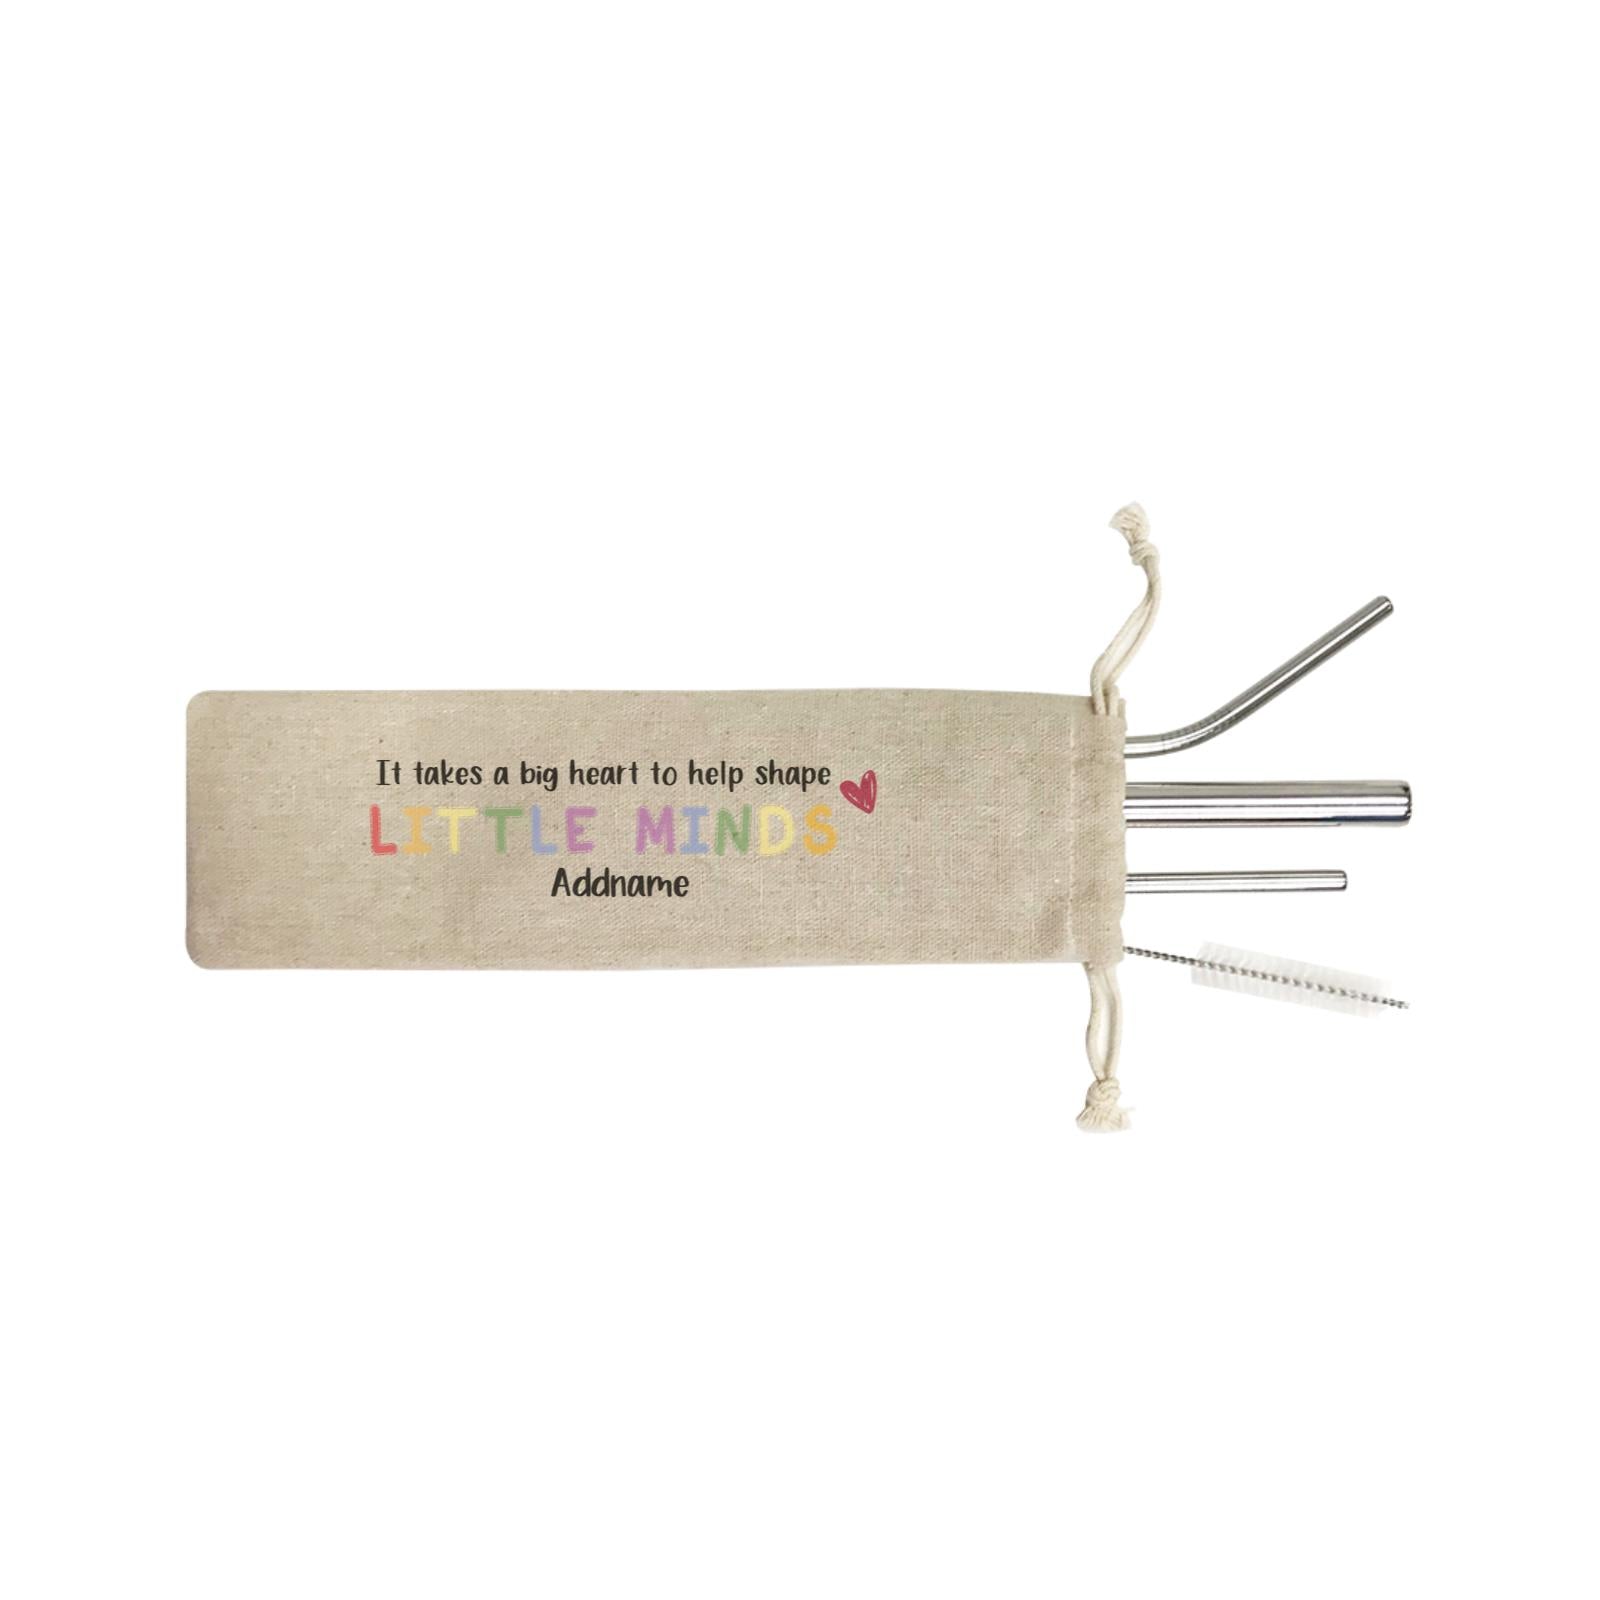 Teacher Quotes 2 It Takes A Big Heart To Help Shape Little Minds Addname SB 4-In-1 Stainless Steel Straw Set in Satchel